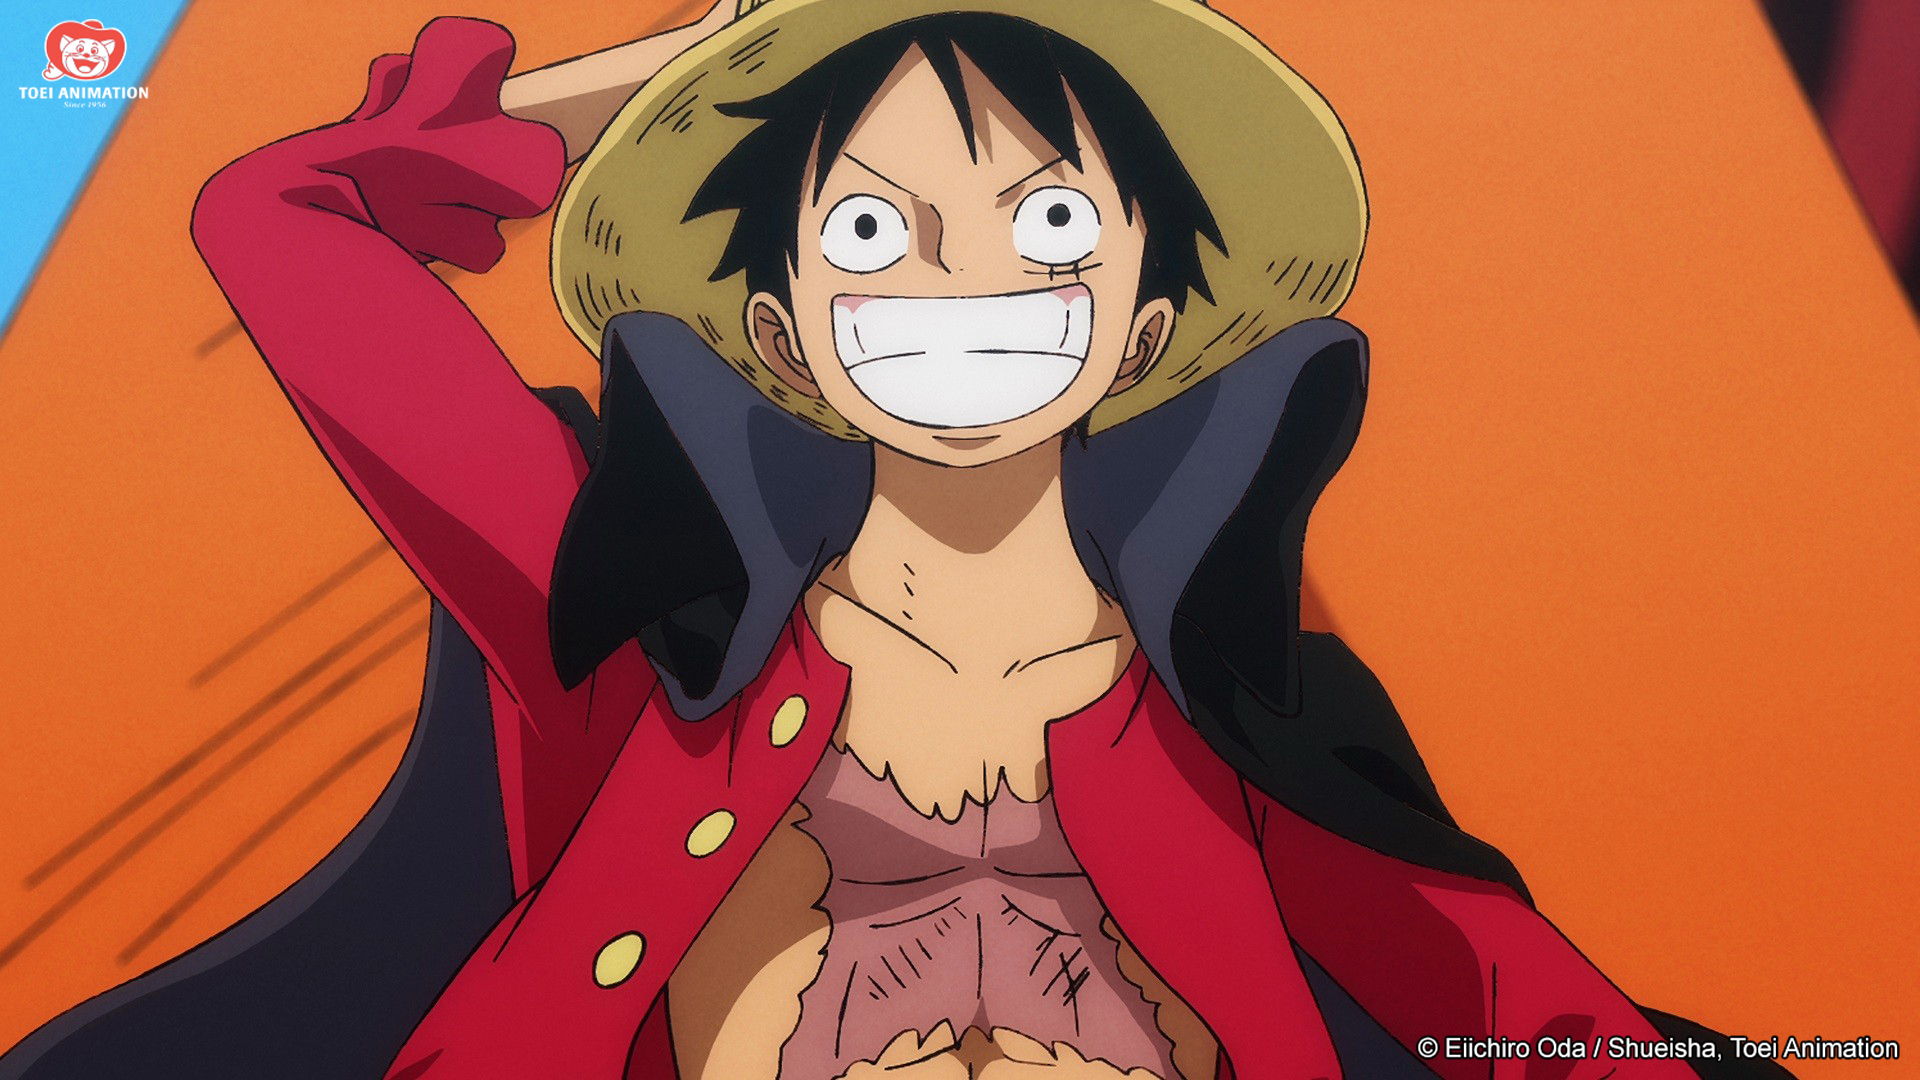 One Piece "WE ARE"